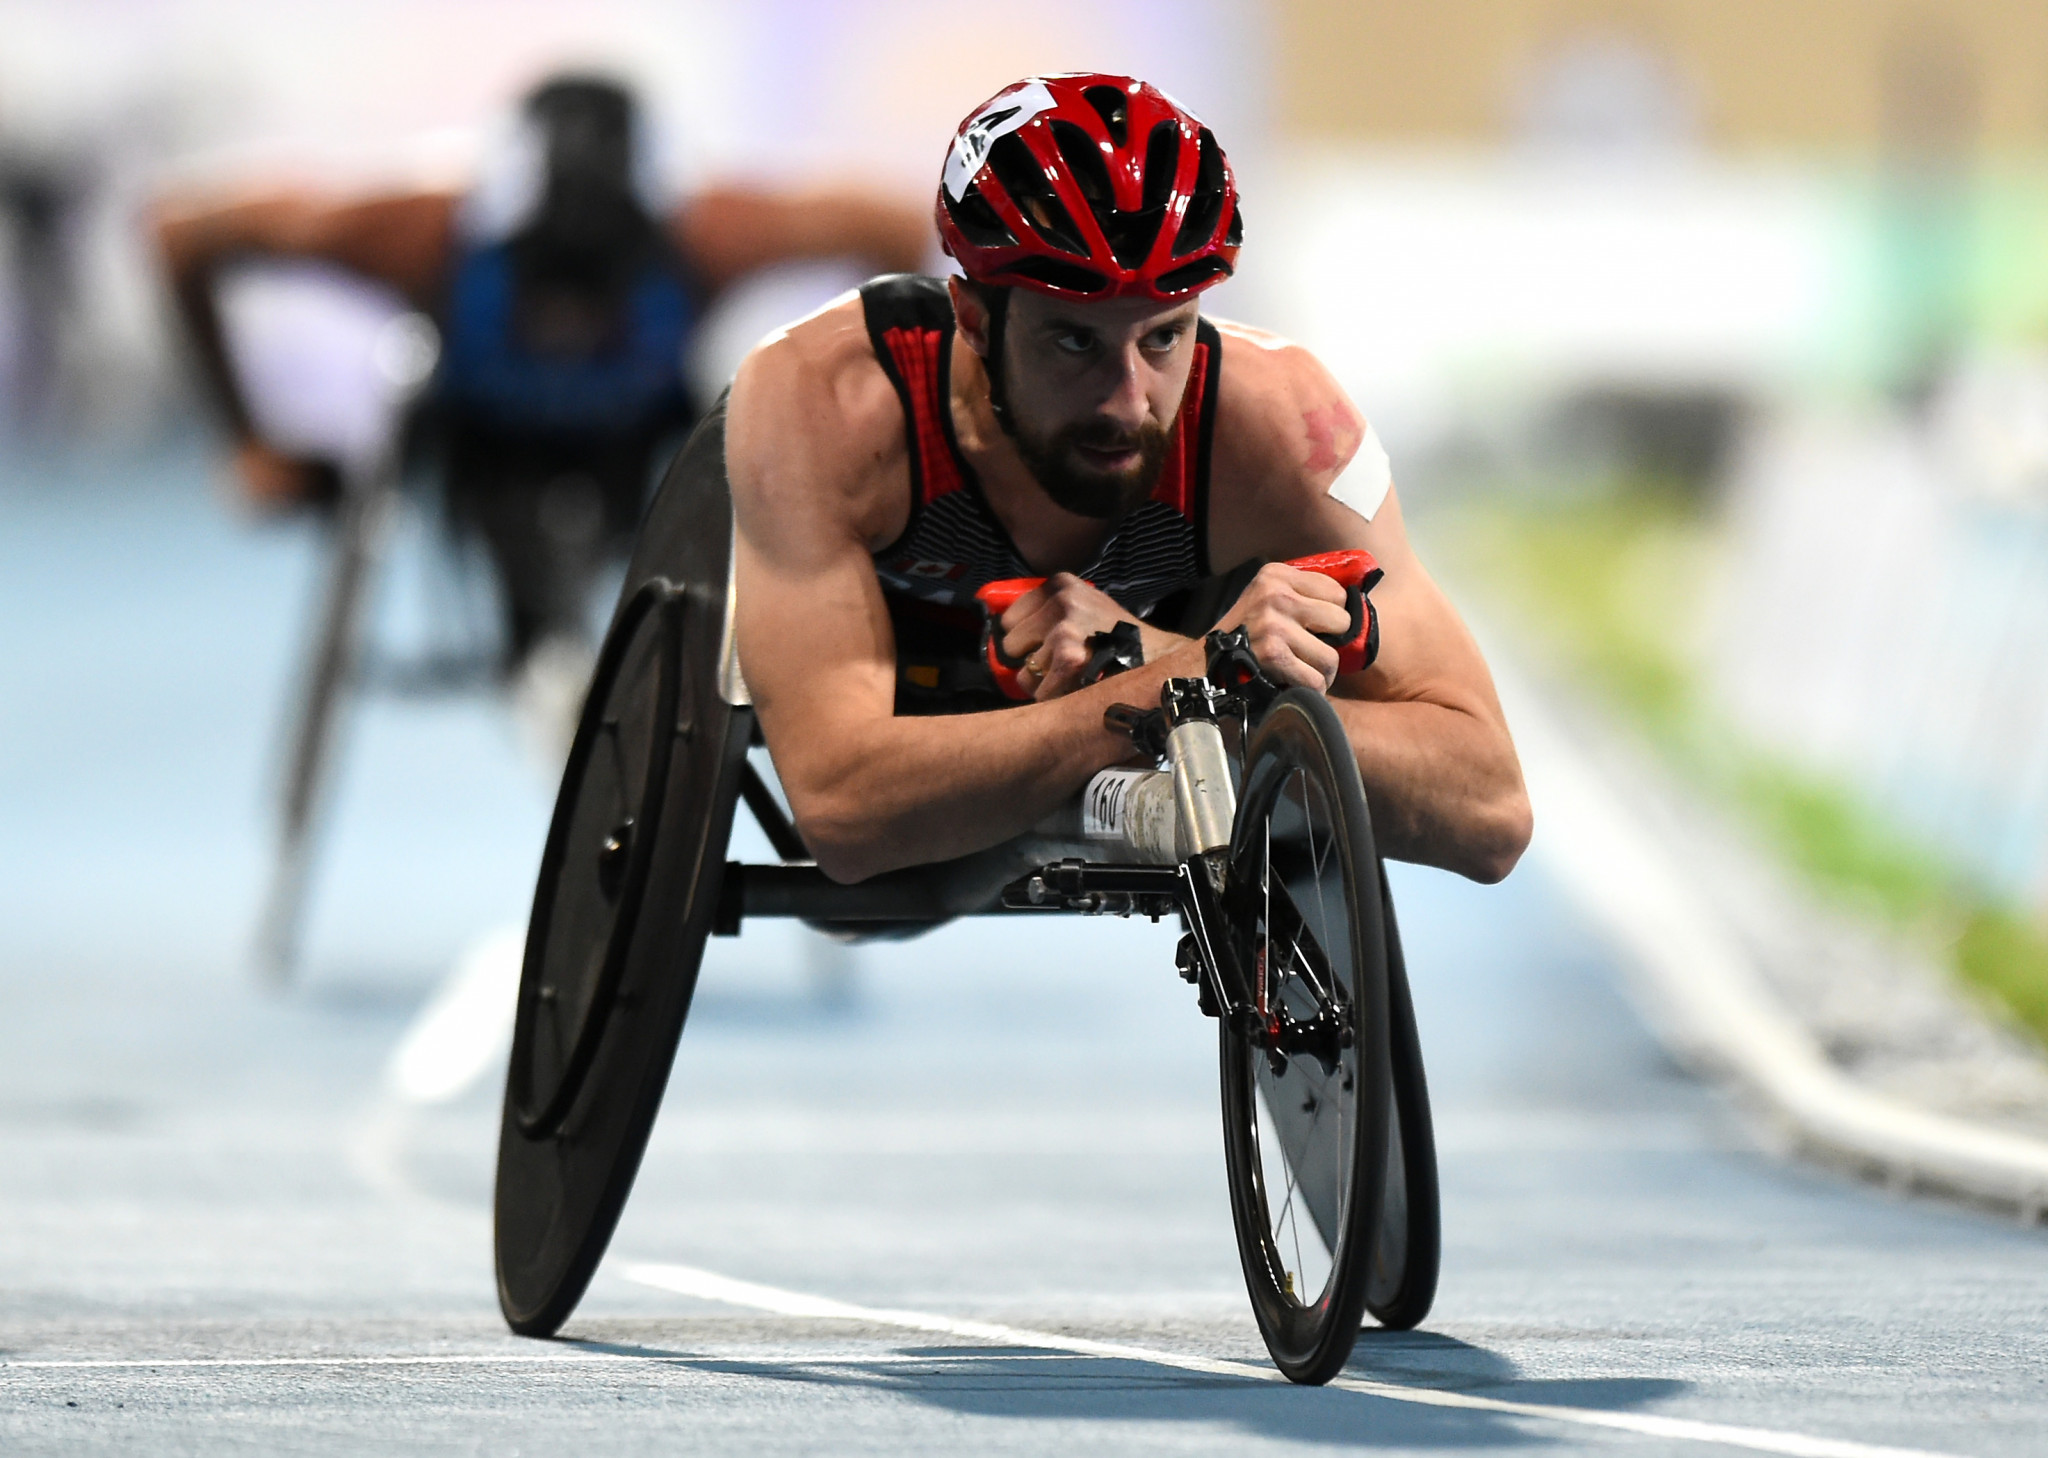 Lakatos and Riech earn Athletics Canada's Para Athlete of the Year Awards